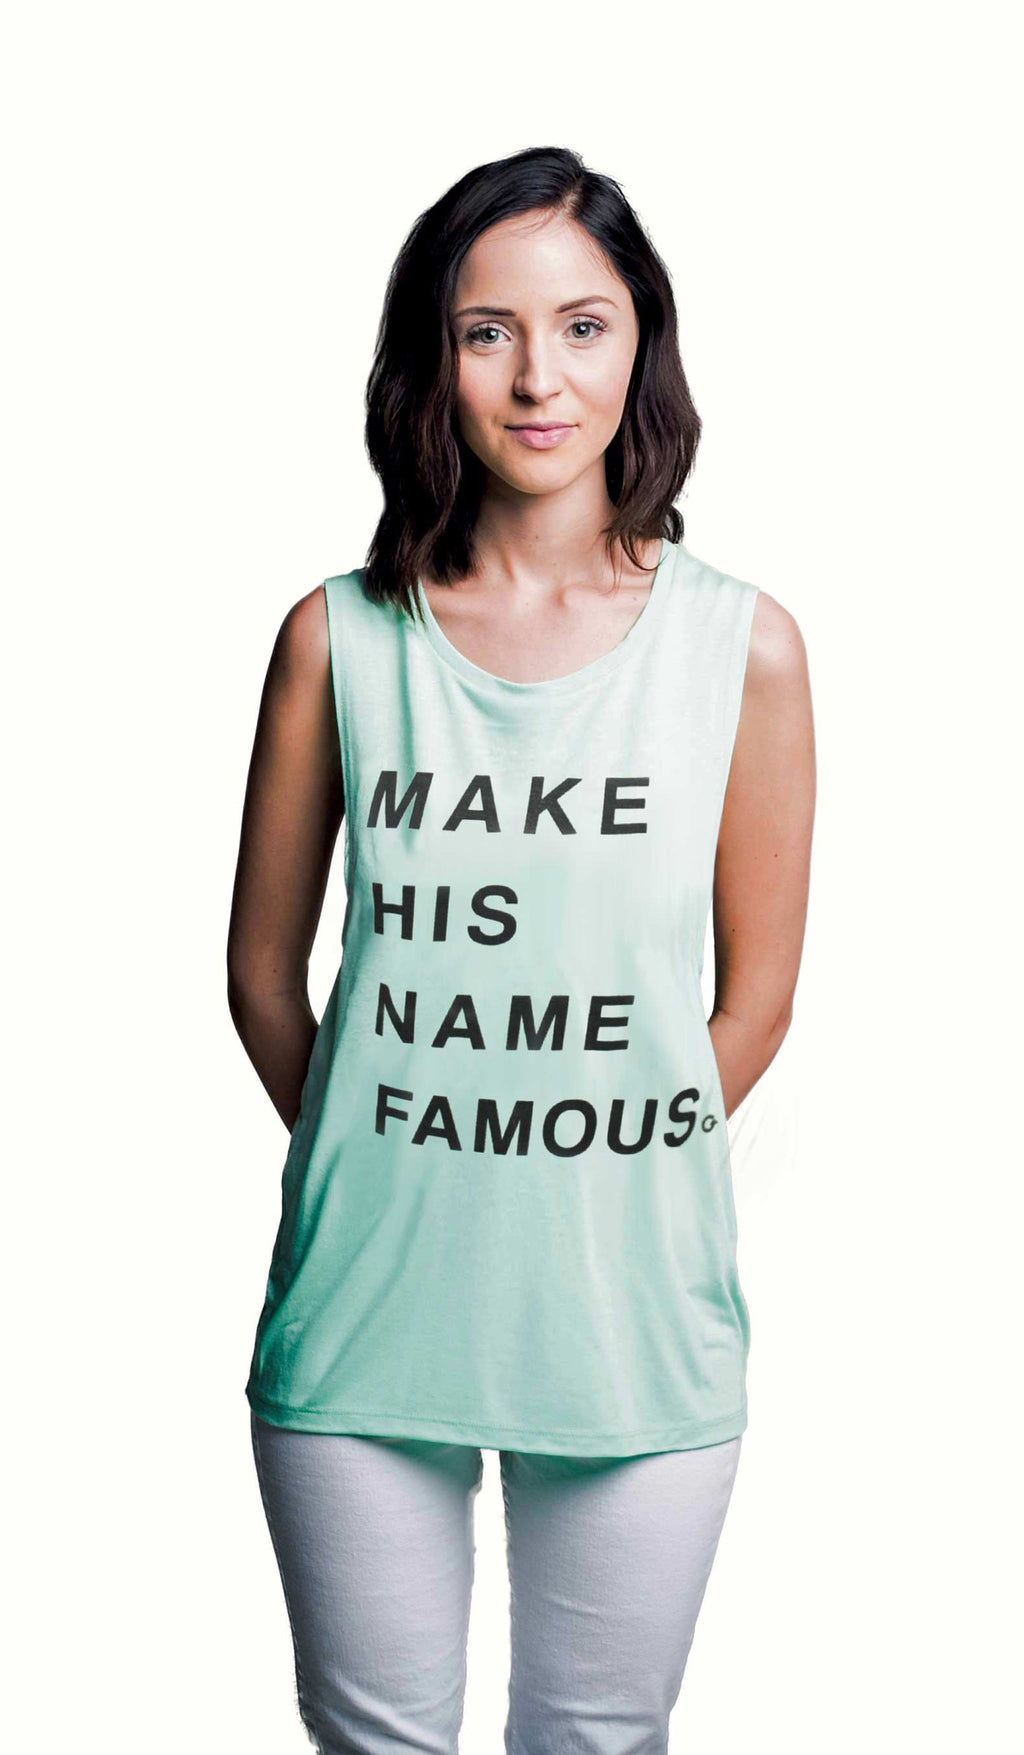 MAKE HIS NAME FAMOUS MINT WOMEN'S MUSCLE TANK